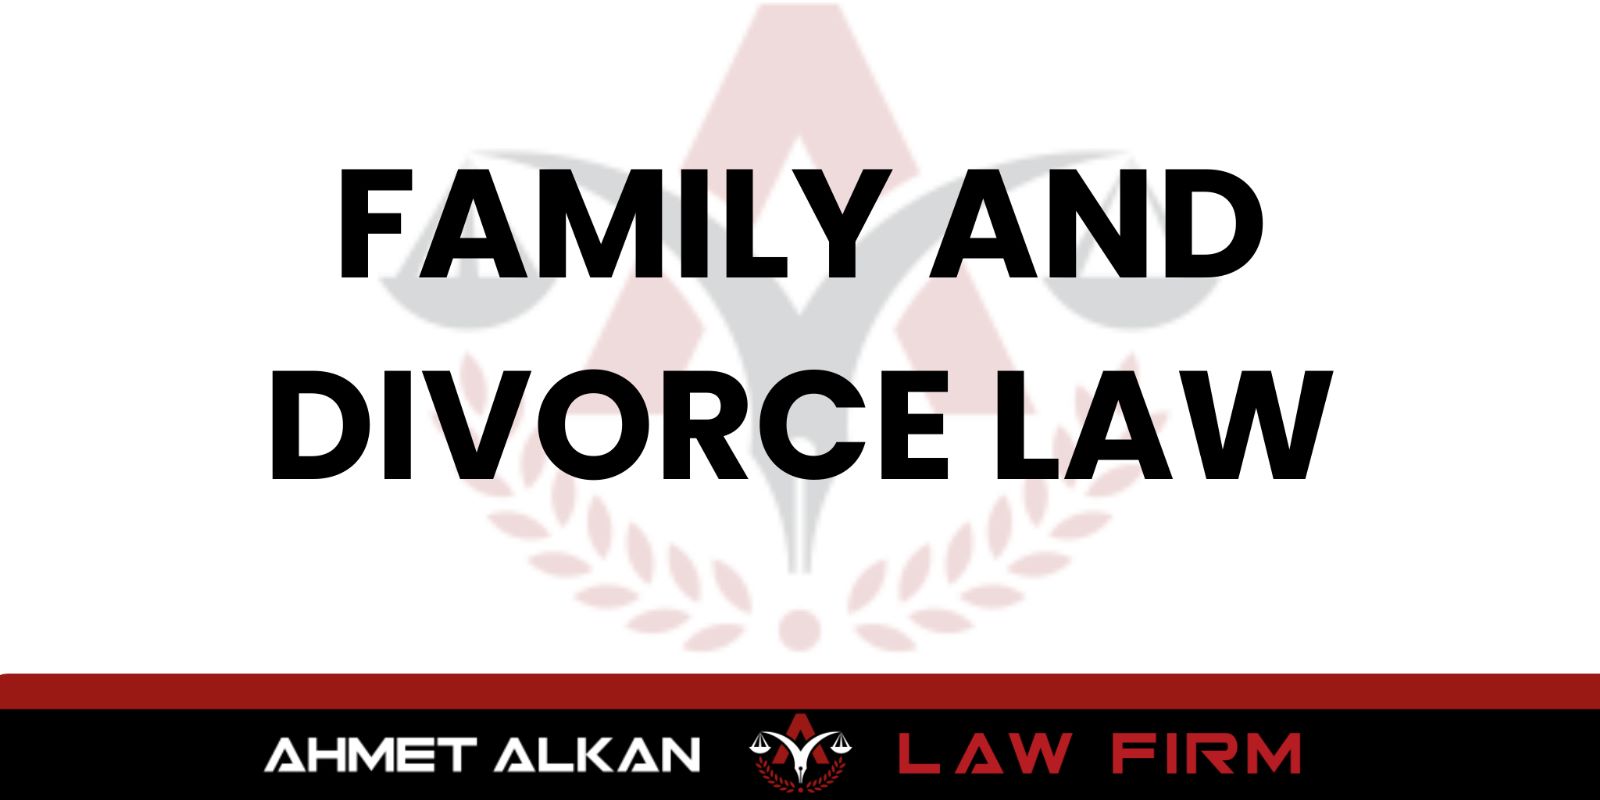 Antalya divorce lawyer provides legal representation & consultancy services in legal business, transactions, disputes and cases that fall within the field of examination and regulation of divorce law.